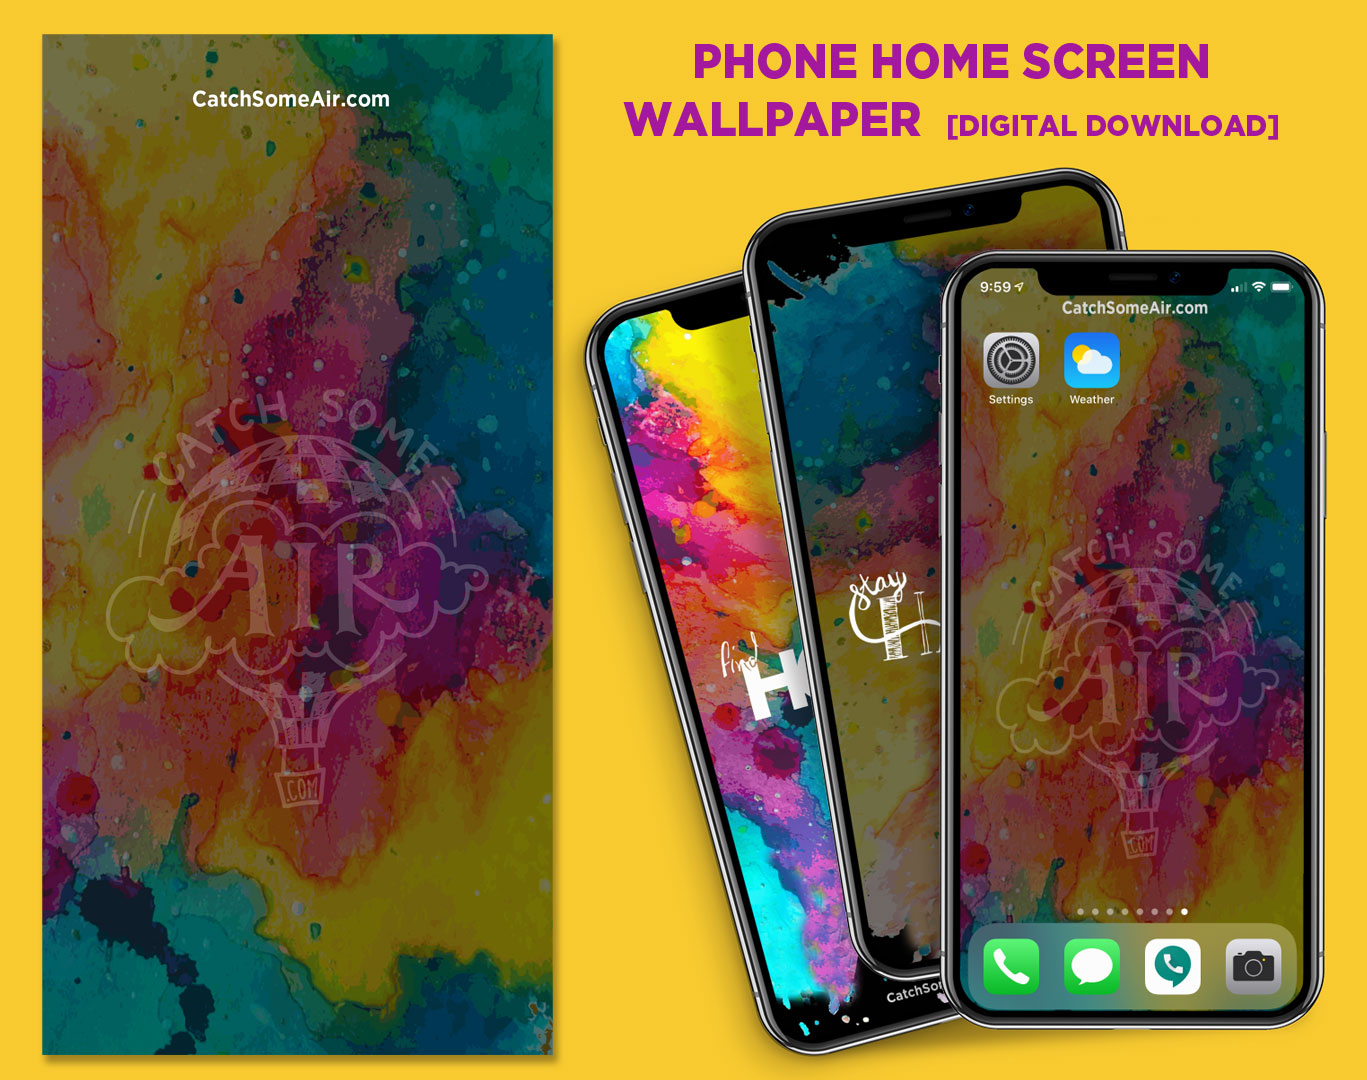 Pimp WallpapersHD  Customize Your Home Screen FREE by touchme